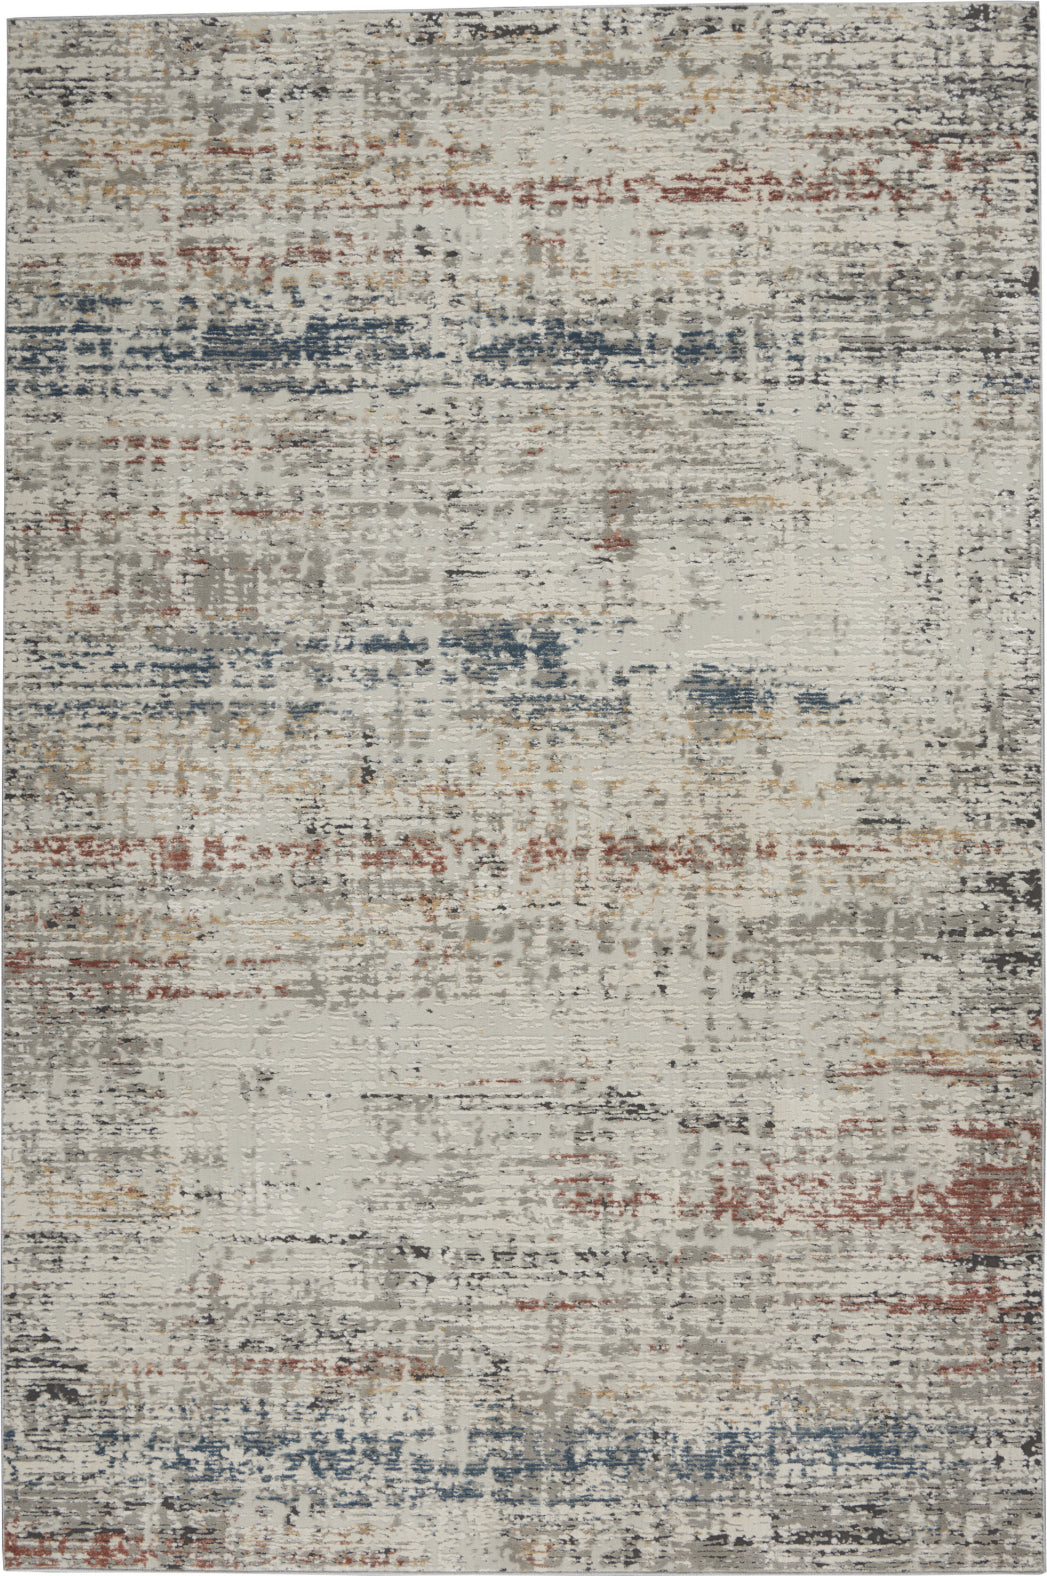 Rustic Textures Incredible – Decor Rug Rugs by RUS02 Blue/Ivory and Area Nourison